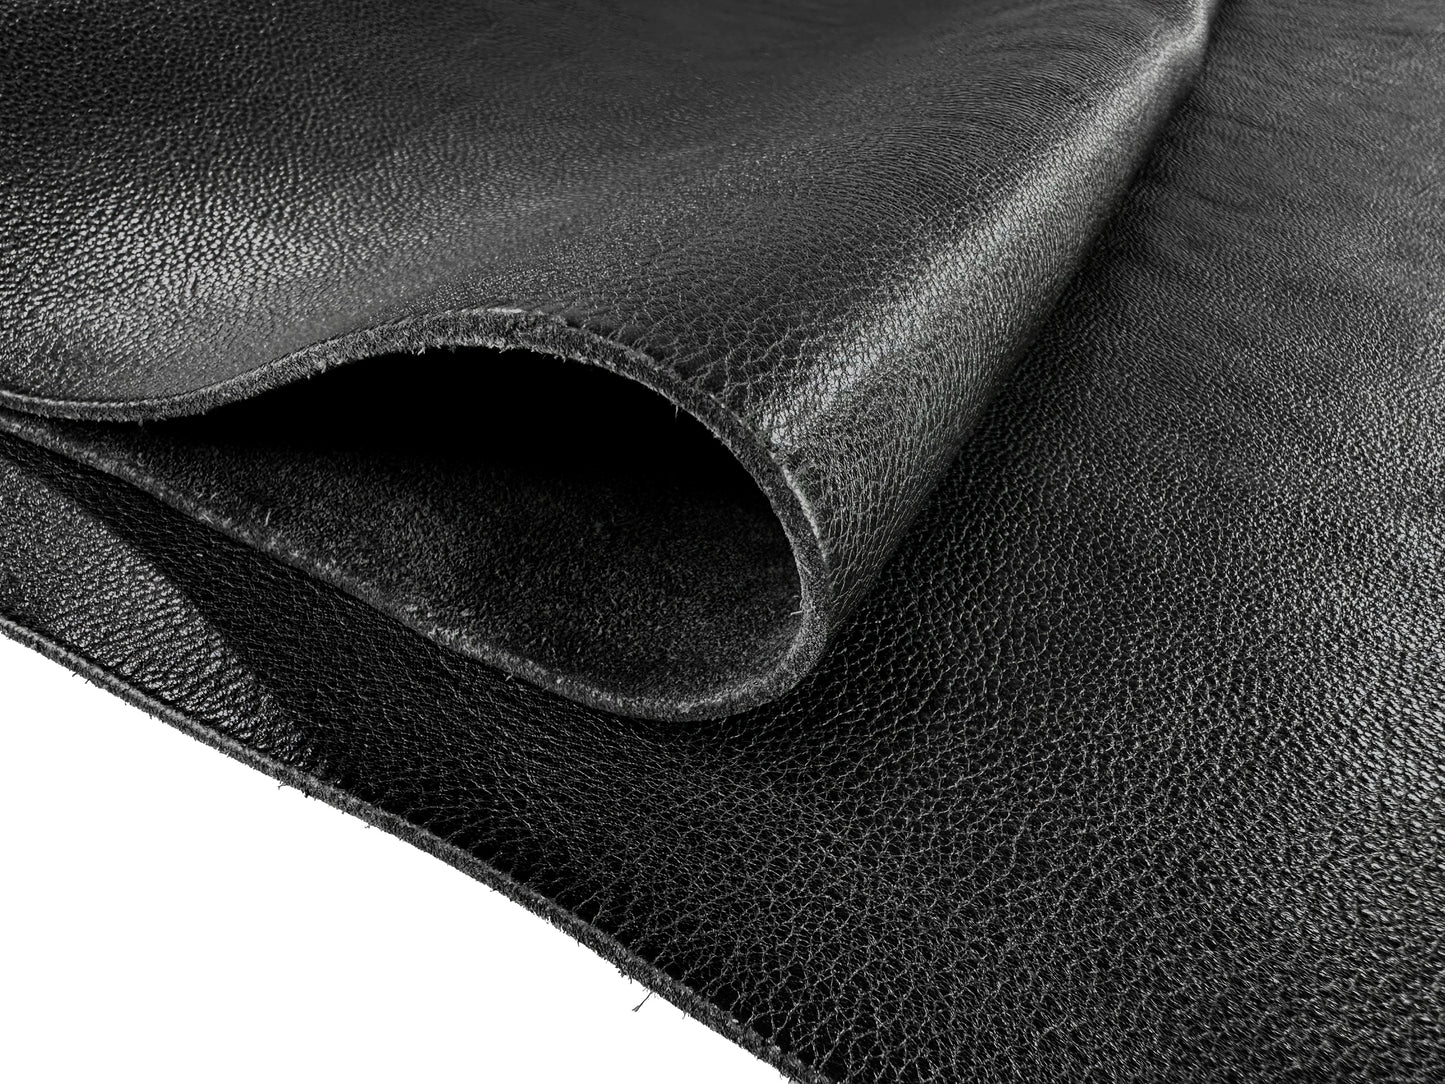 MW Natural Tanned Shrink Leather #8 Black